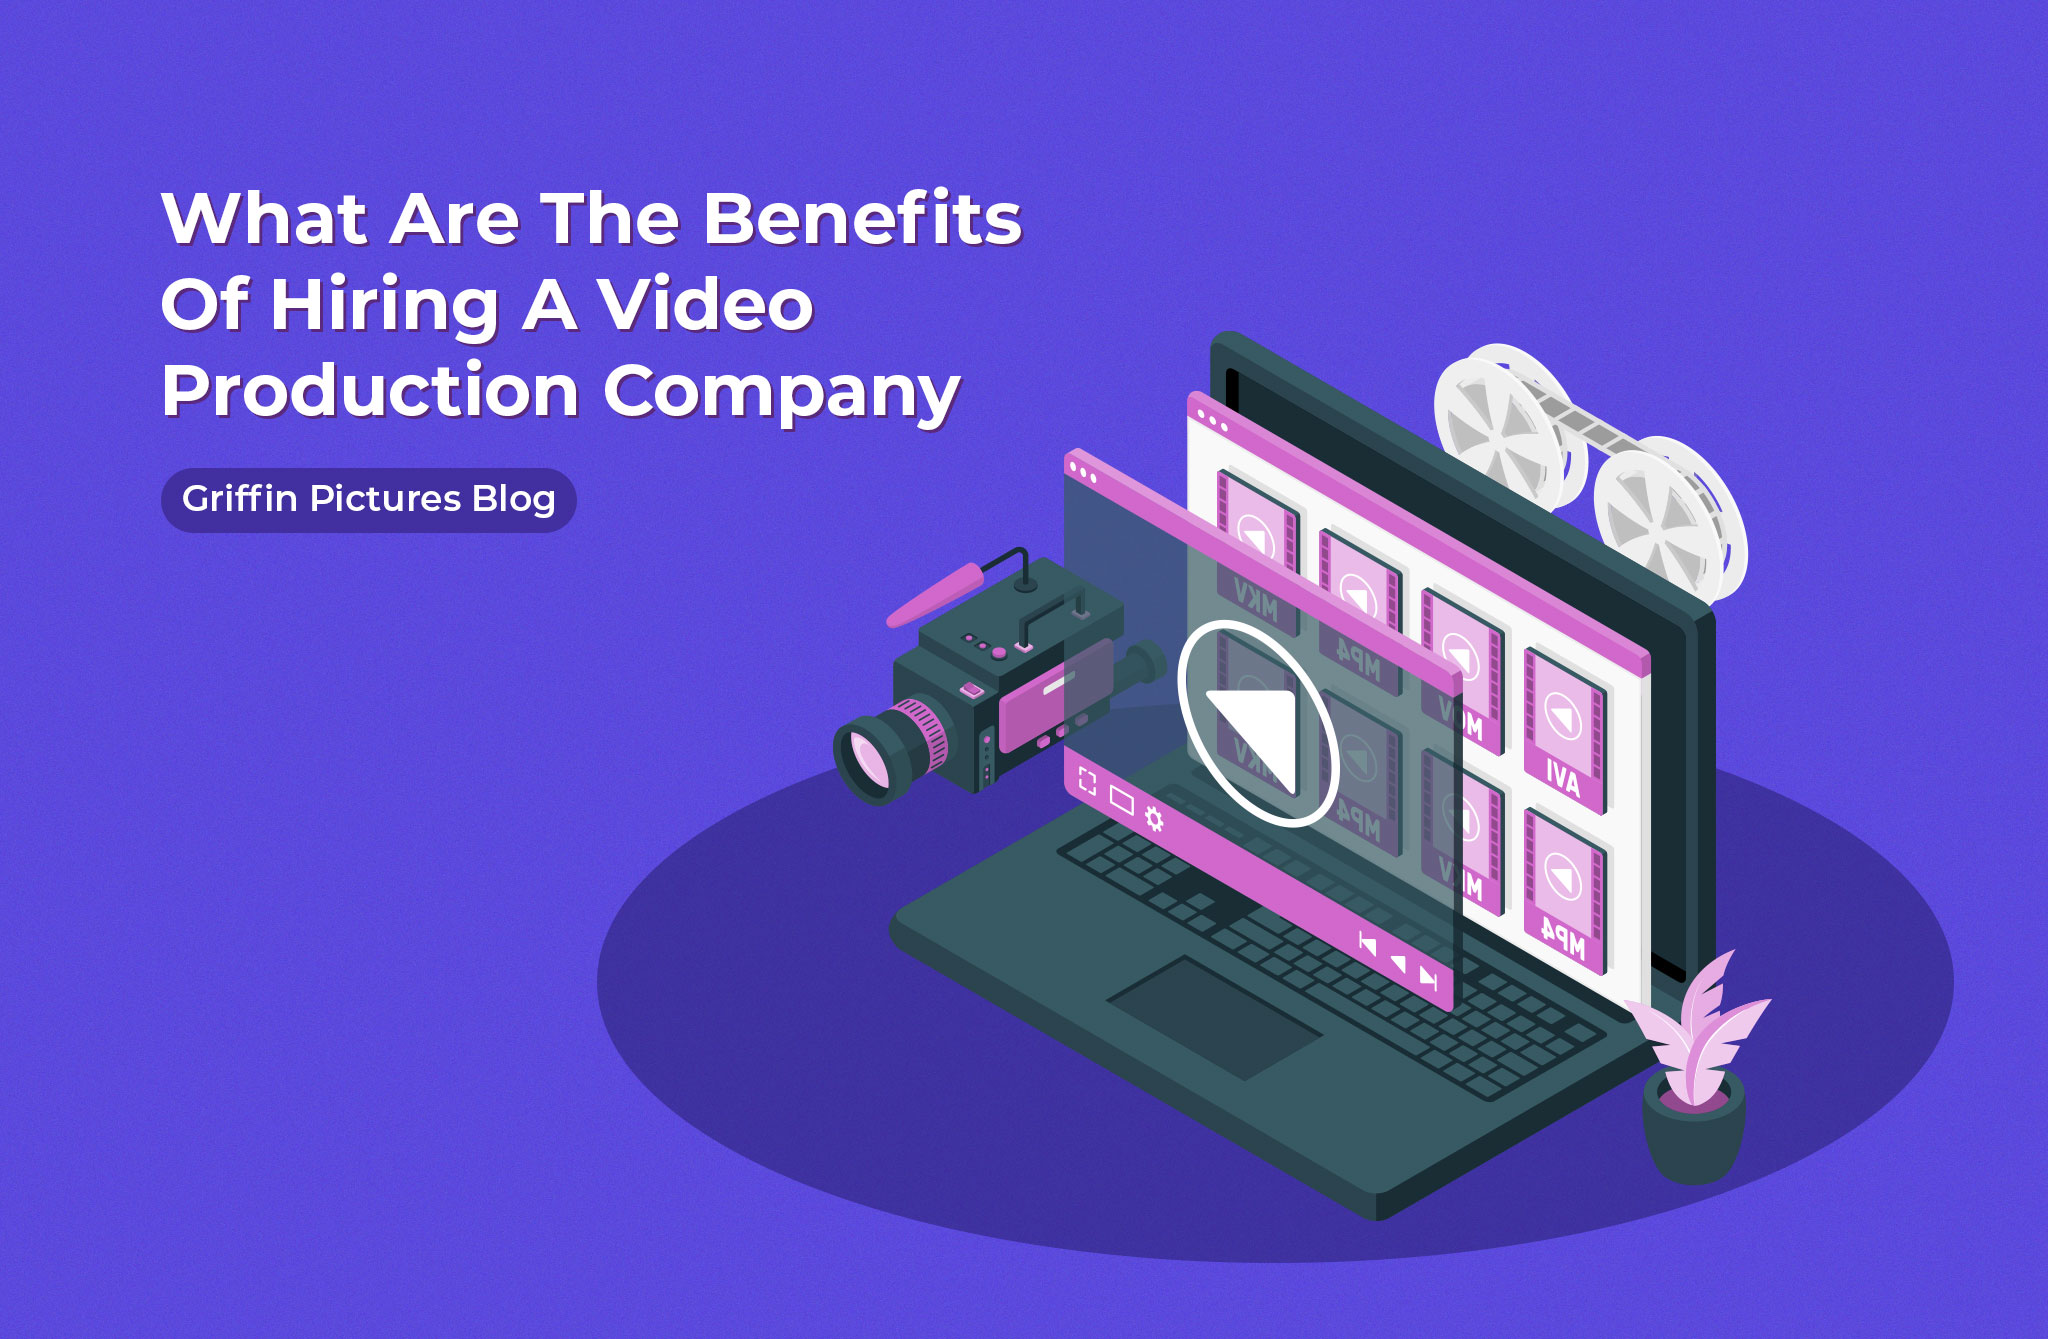 6 Benefits of Hiring A Video Production Company